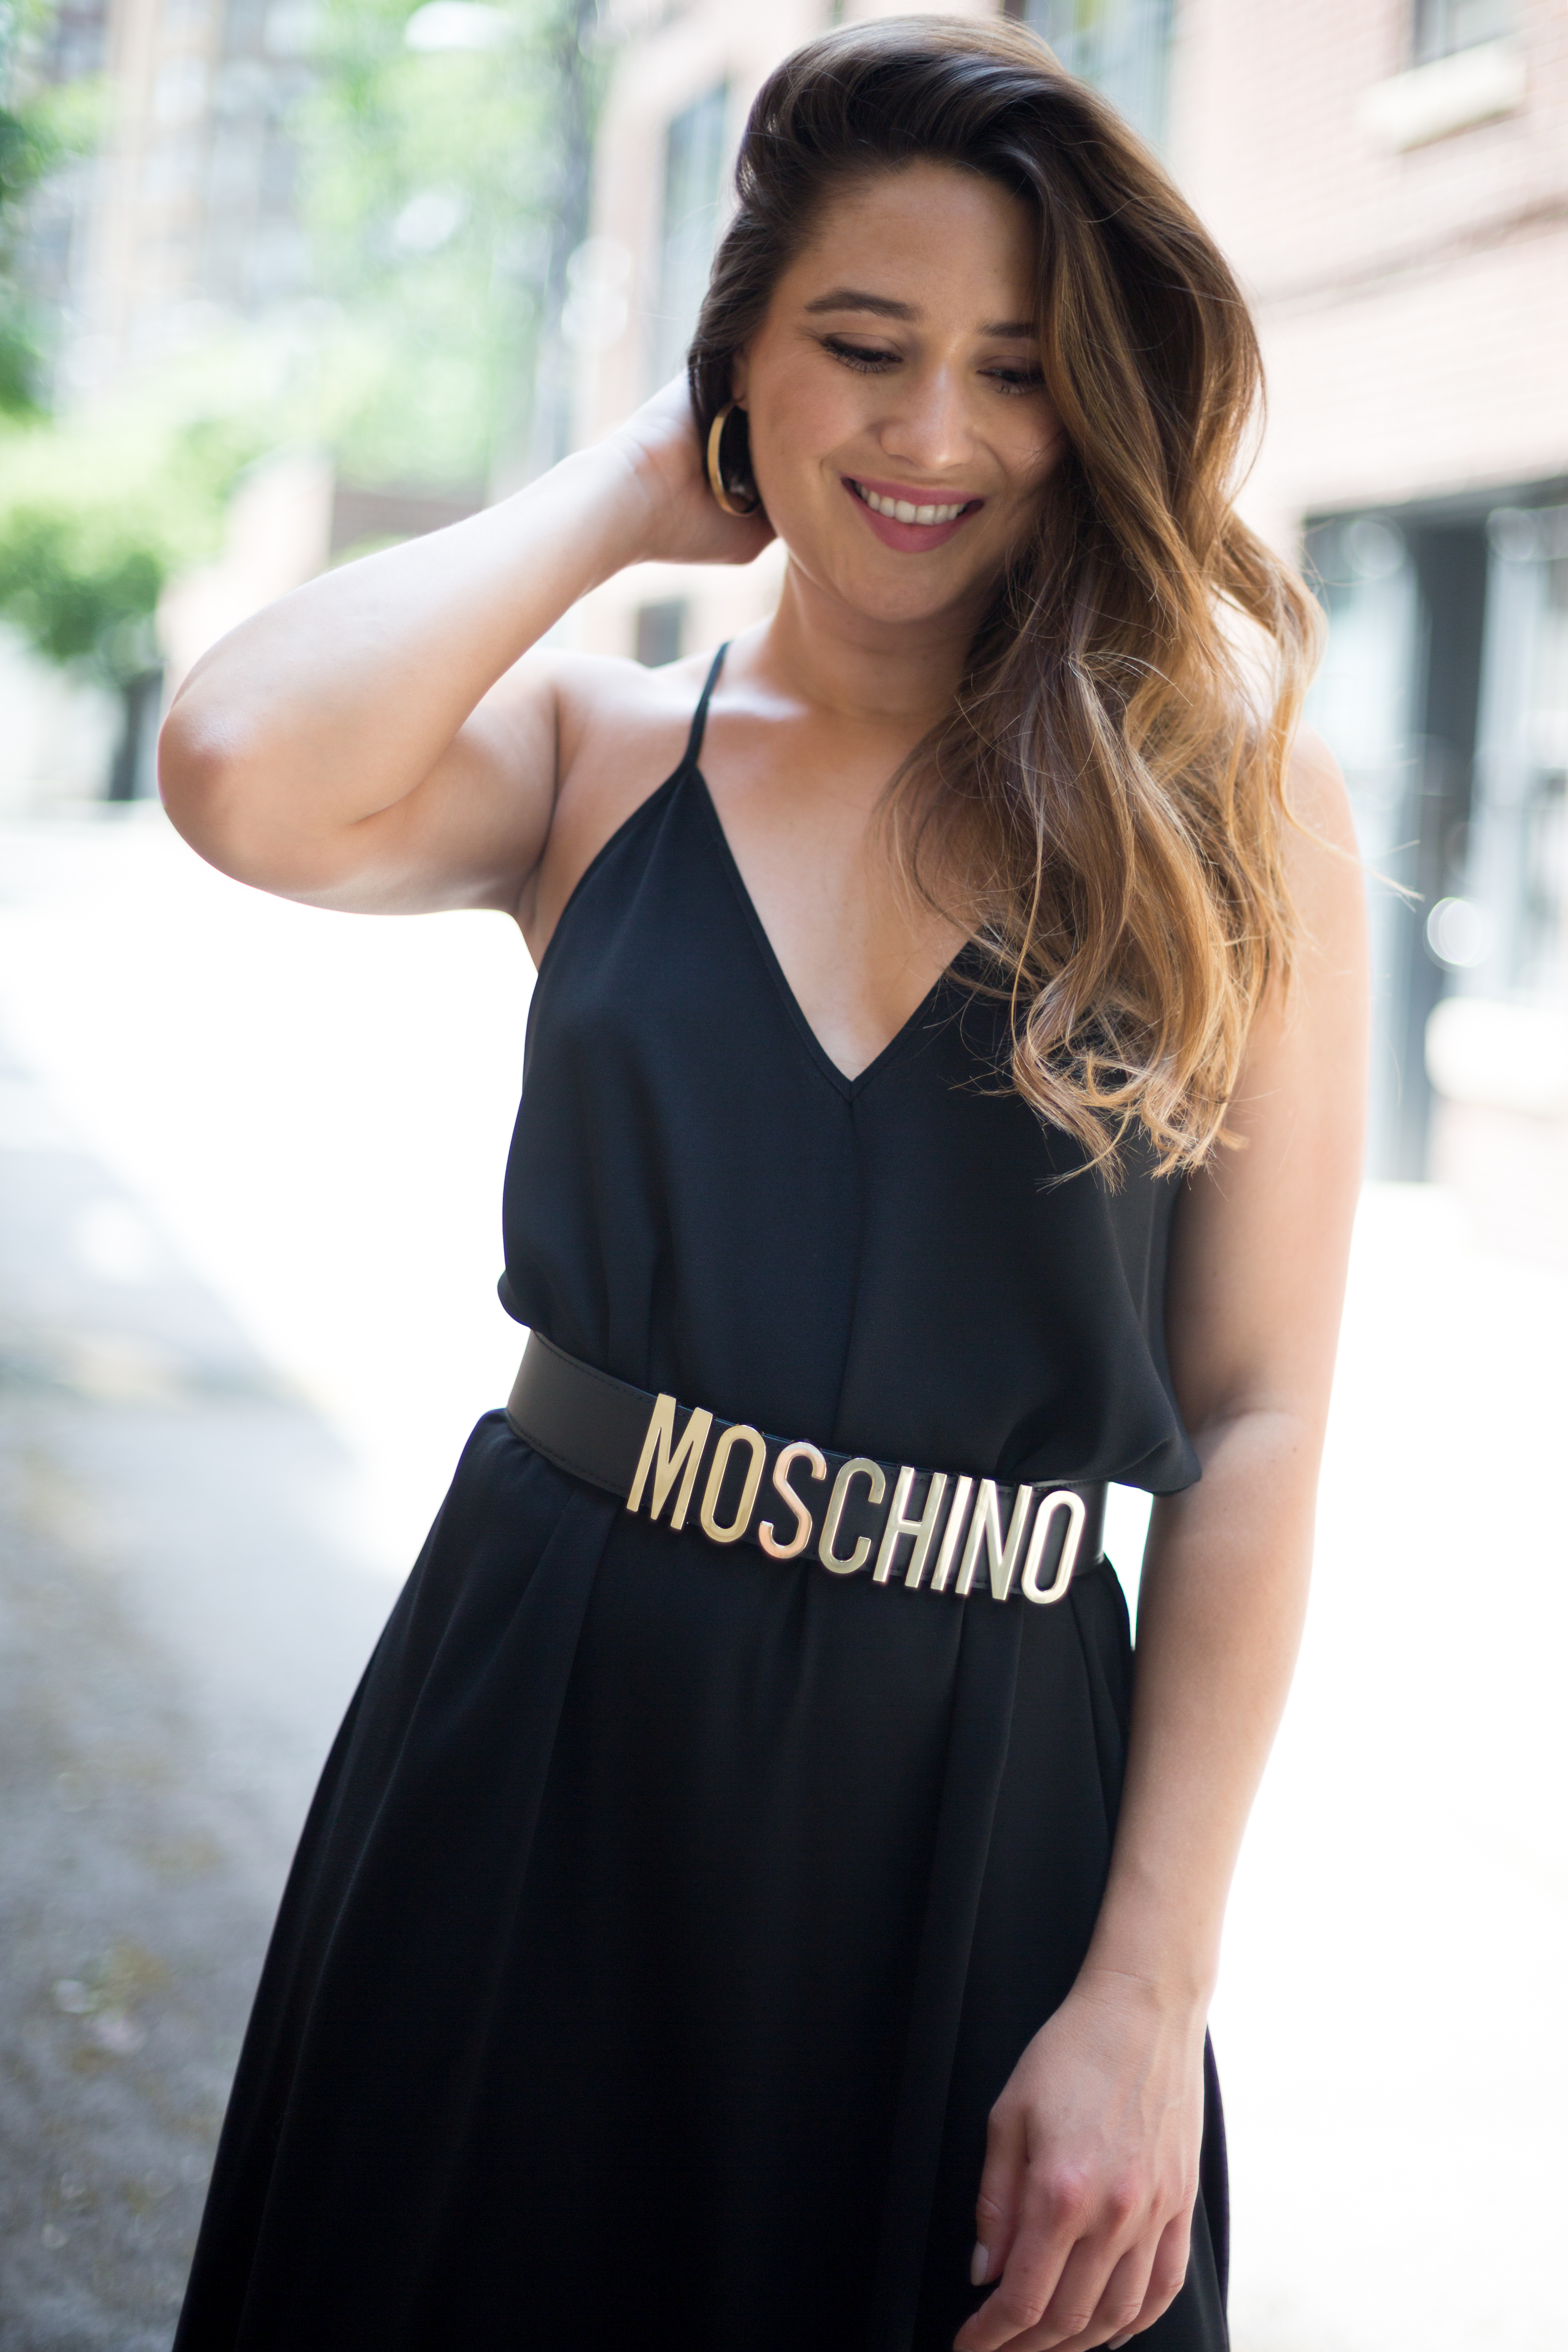 moschino belt outfit